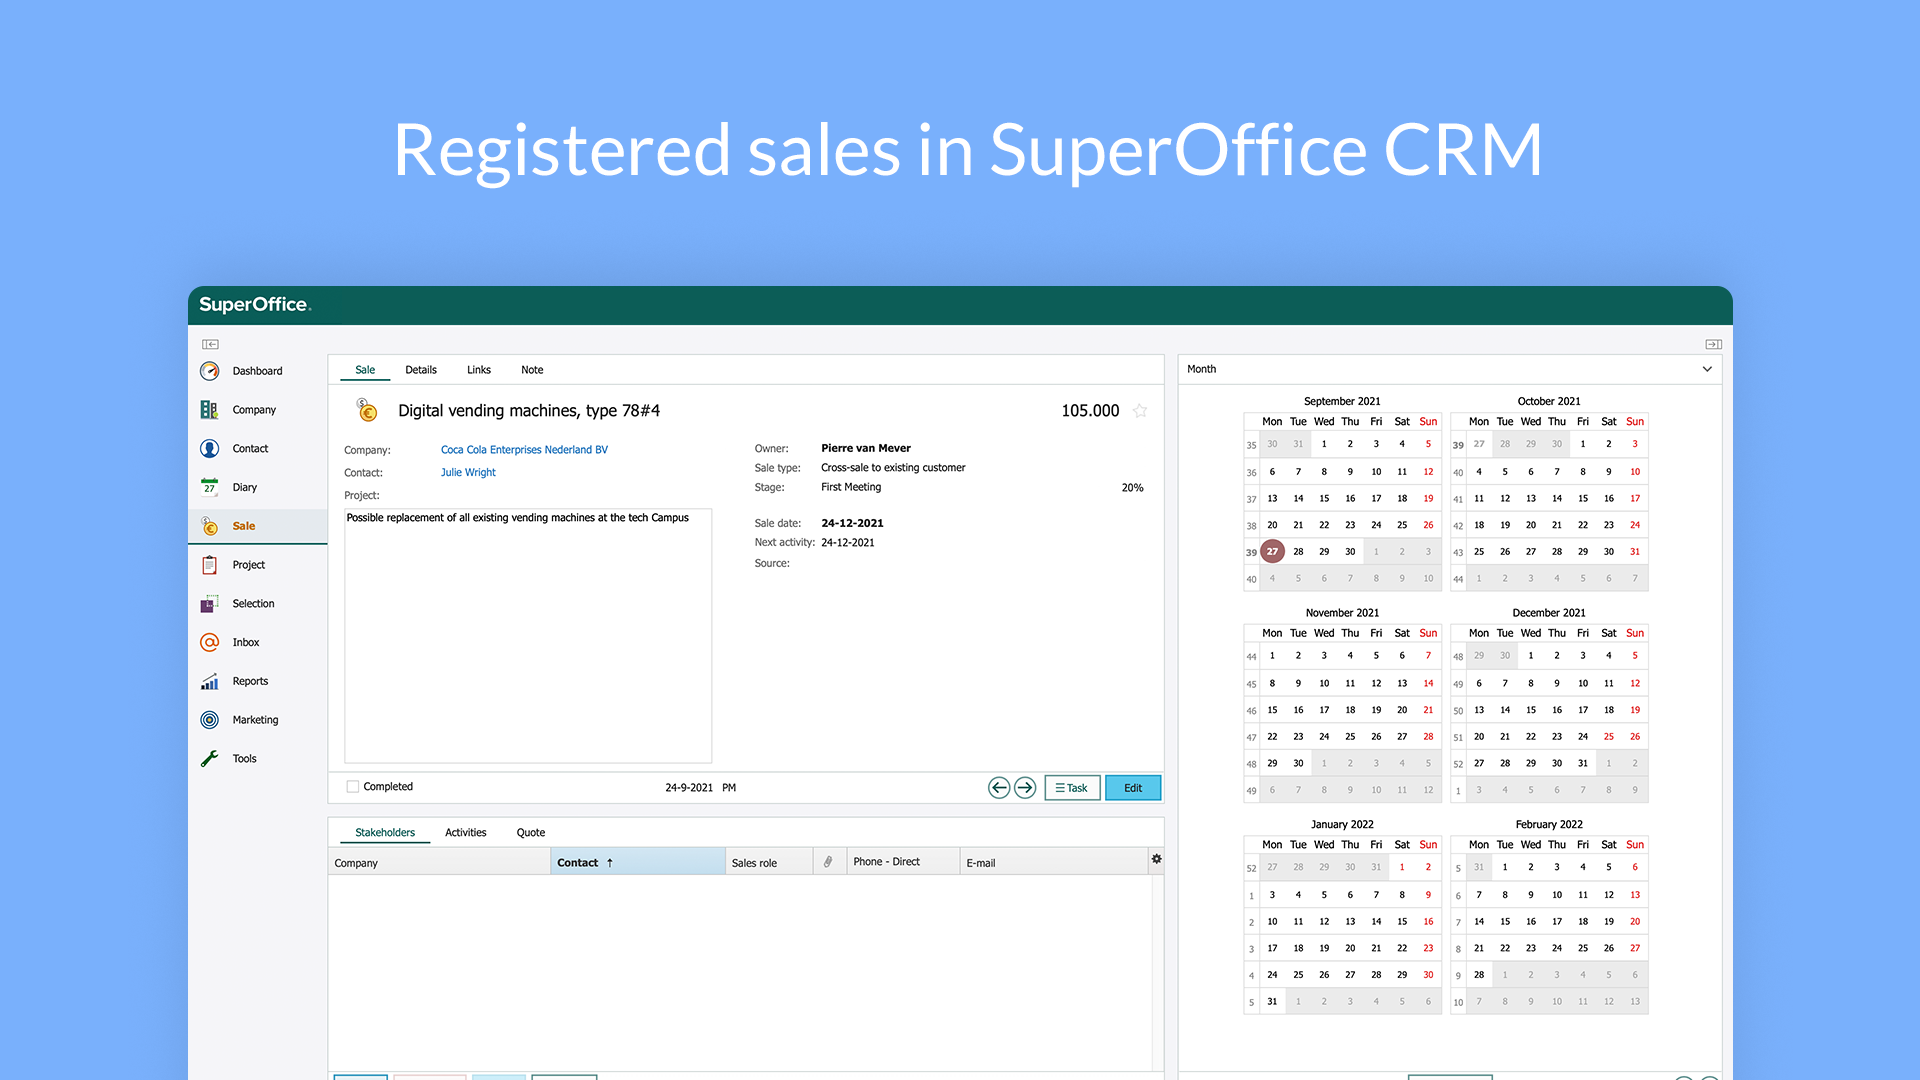 Registered sales in SuperOffice CRM